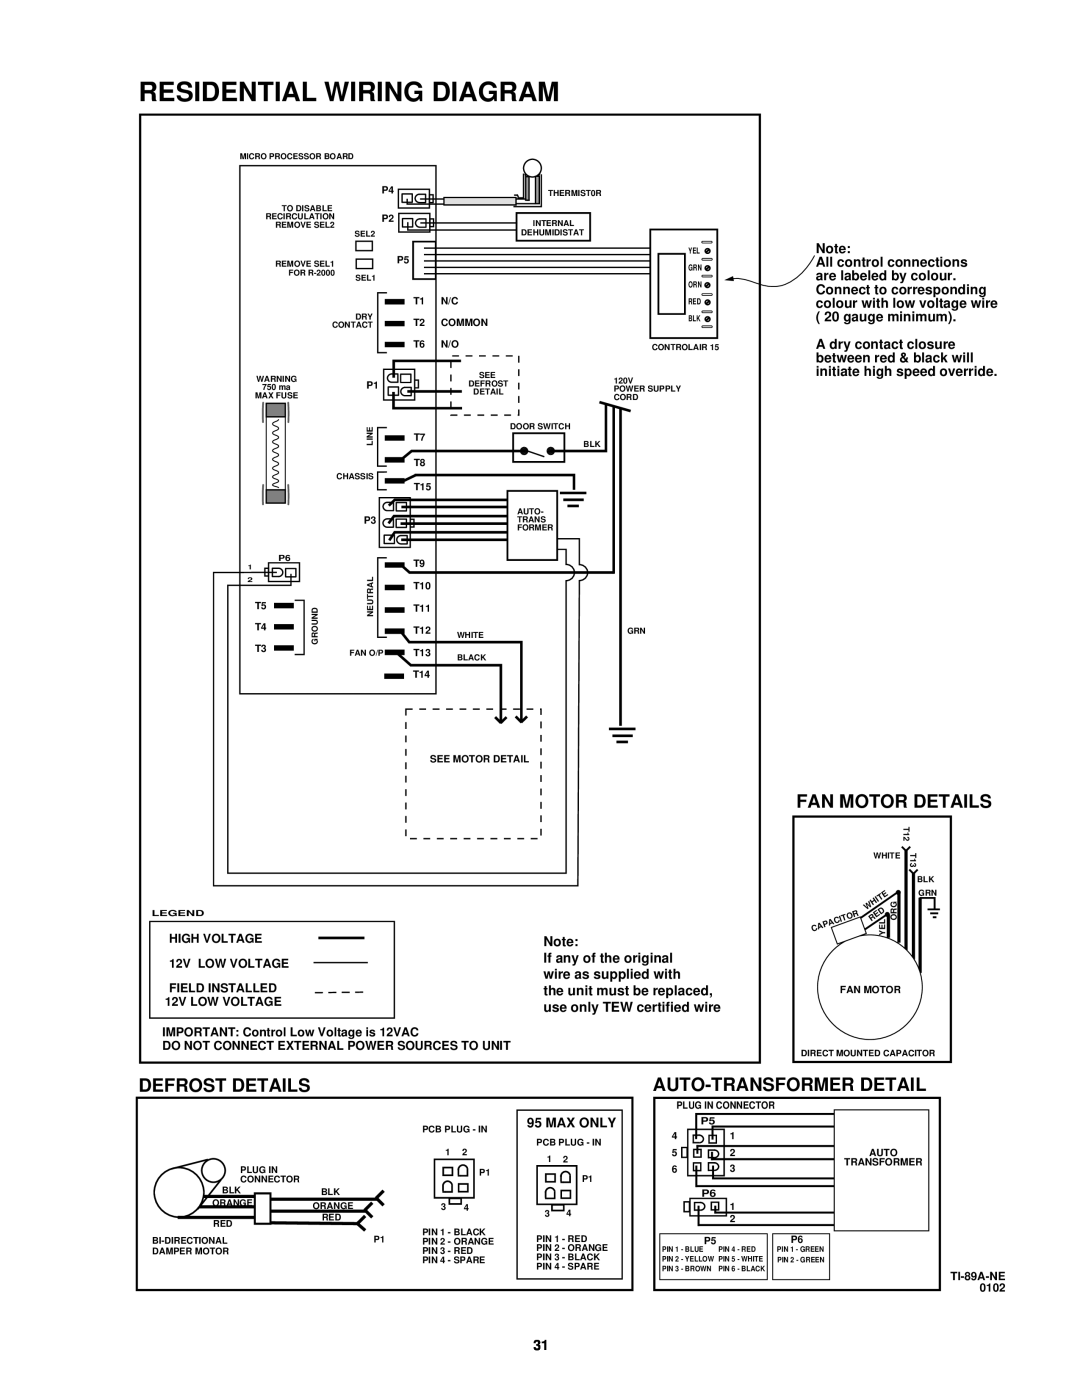 Lifebreath 95MAX, 200MAX, 155MAX Residential Wiring Diagram, Fan Motor Details, Defrost Details, Auto-Transformerdetail 